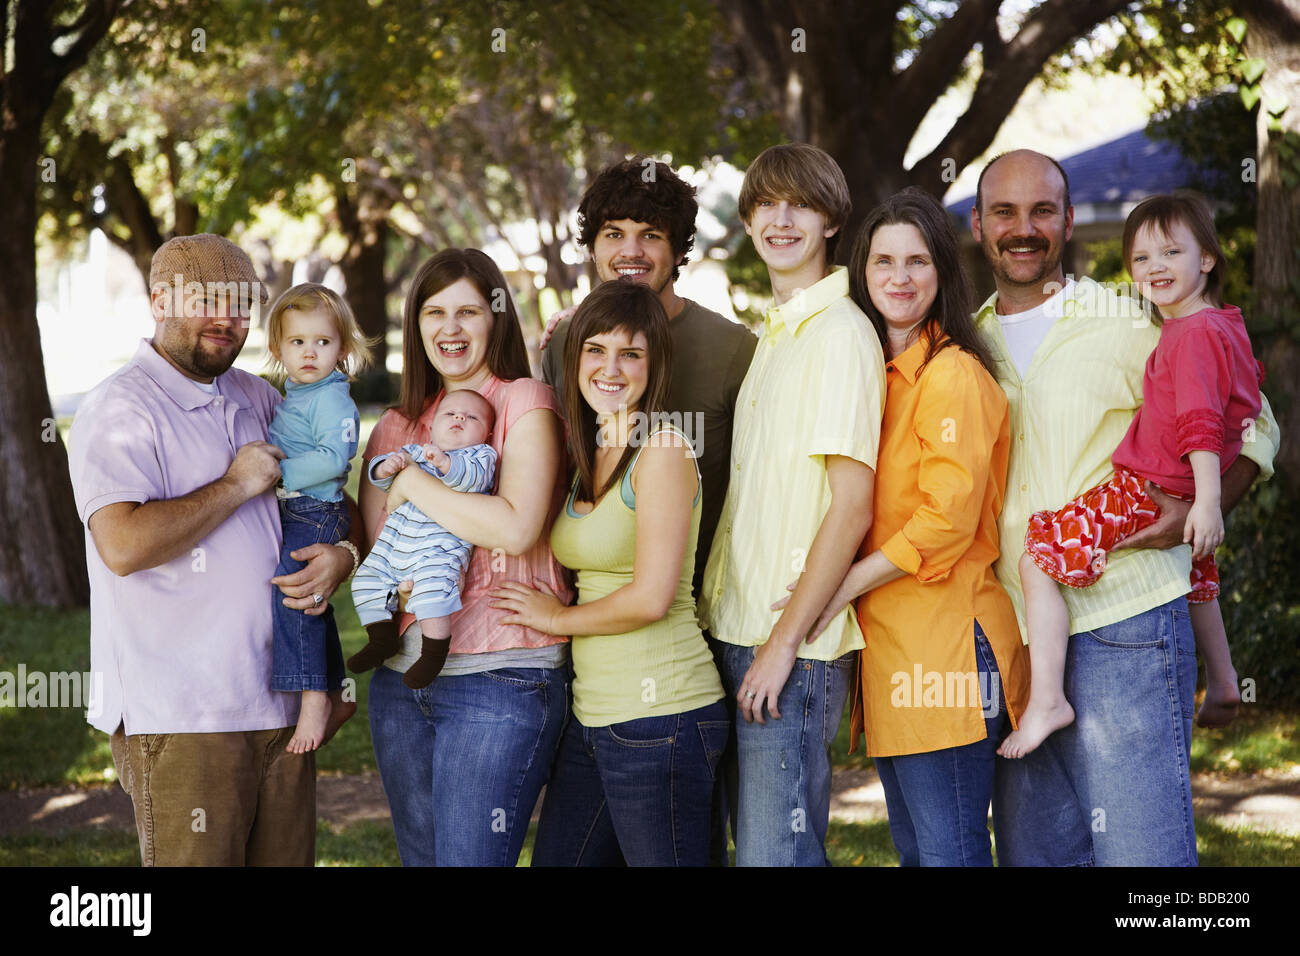 Portrait of a family standing together and smiling Stock Photo